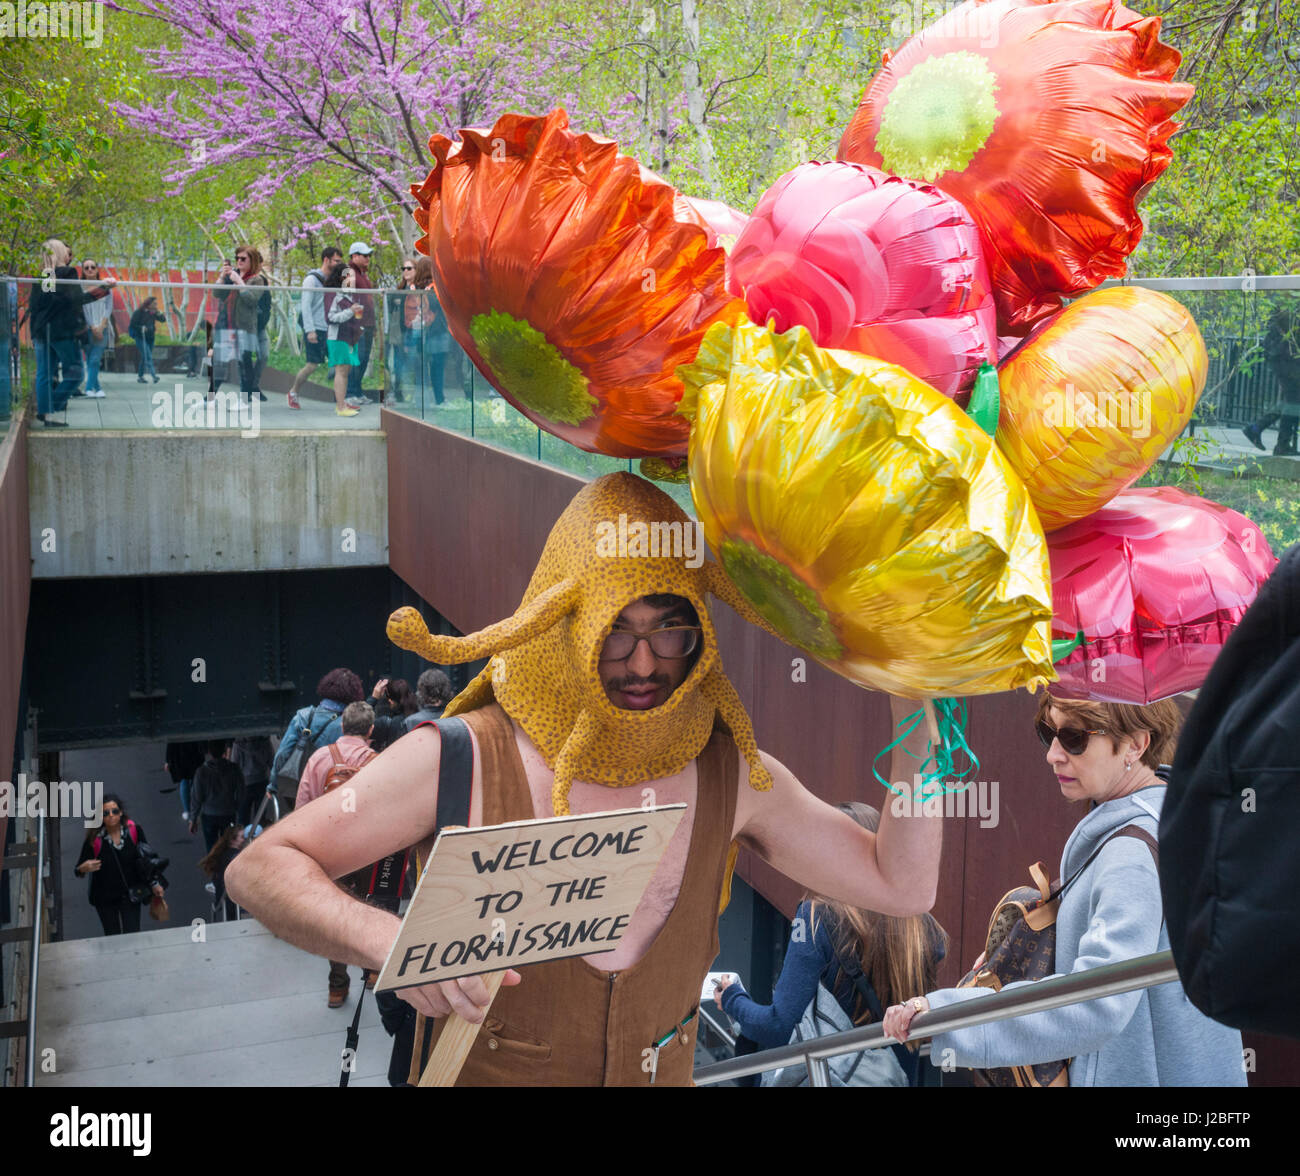 The Brazilian artist, André Feliciano known as the 'art gardener' walks down the High Line Park in New York on Sunday, April 23, 2017 distributing balloons and flowers to passer-by in his performance art piece, the Floraissance parade. The Floraissance is an art movement created by Feliciano based on the idea that contemporary cannot describe art anymore and we art moving into the next phase, growing like flowers, into the Floraissance. (© Richard B. Levine) Stock Photo